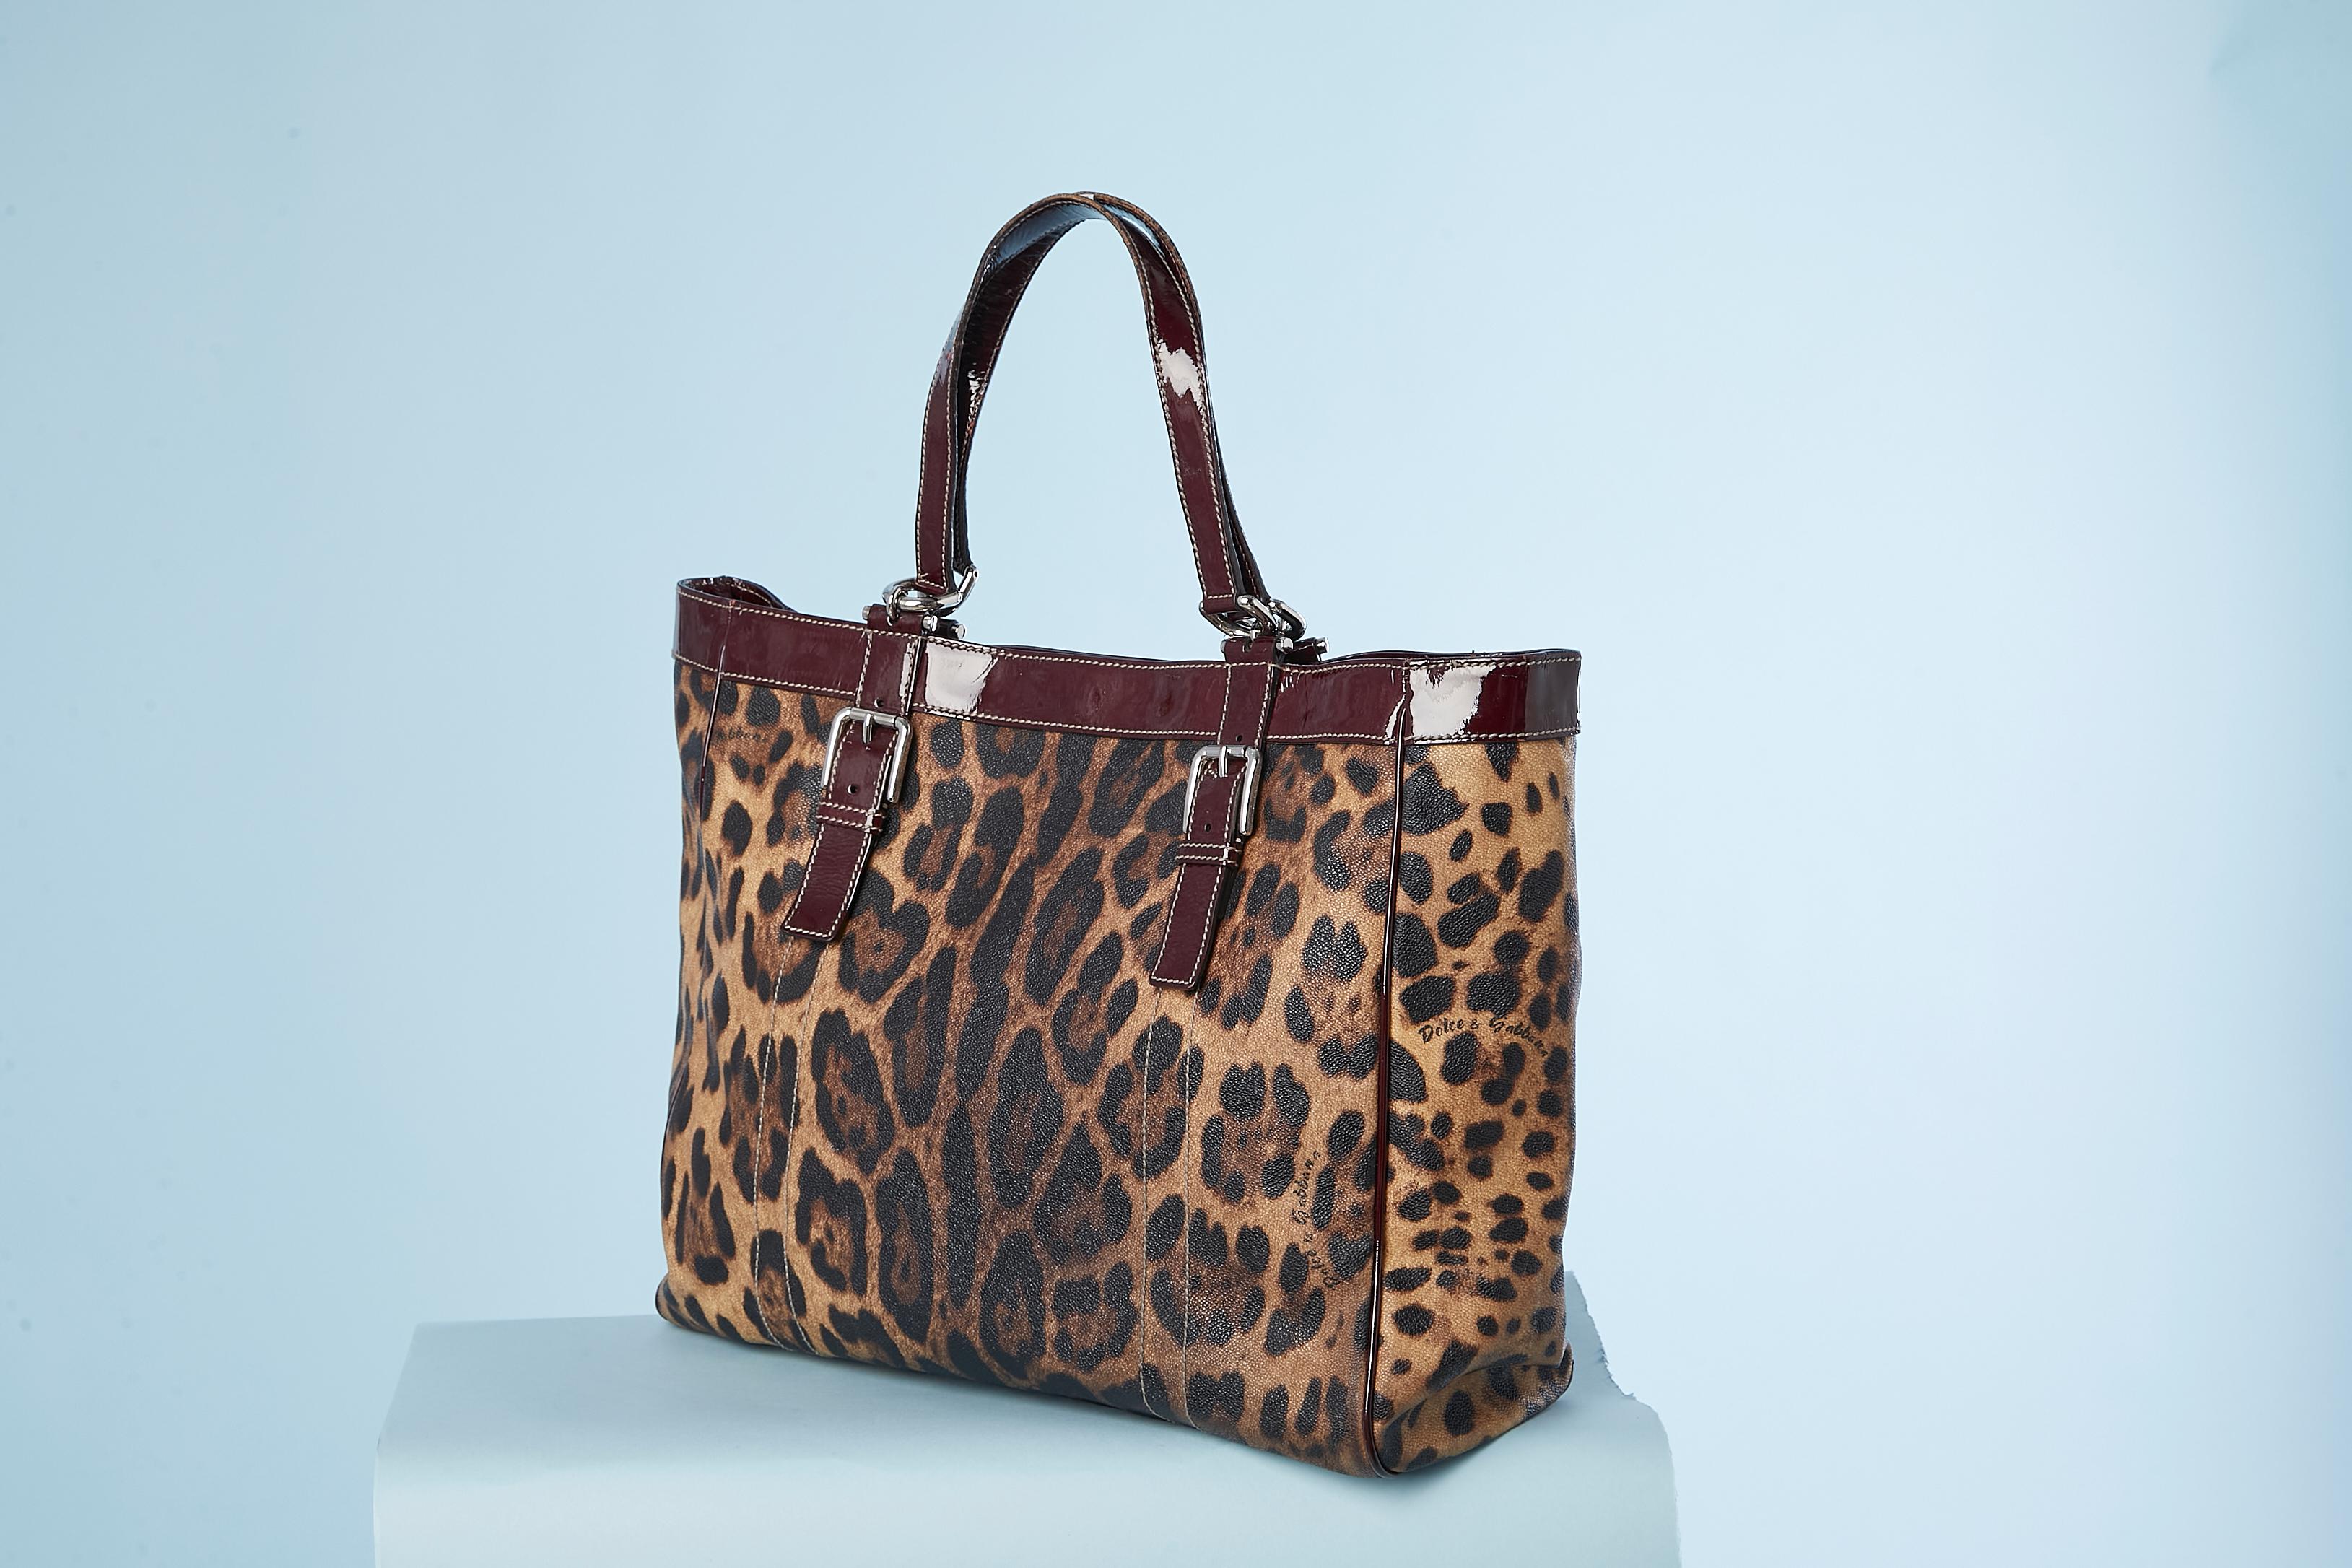 Coated leopard printed canevas and patent leather details. One outside pocket with zip; One inside pocket with zip and one small without ( mobile phone pocket) One snap in the middle and 2 straps with snaps as well ( to close the bag) . Brown cotton